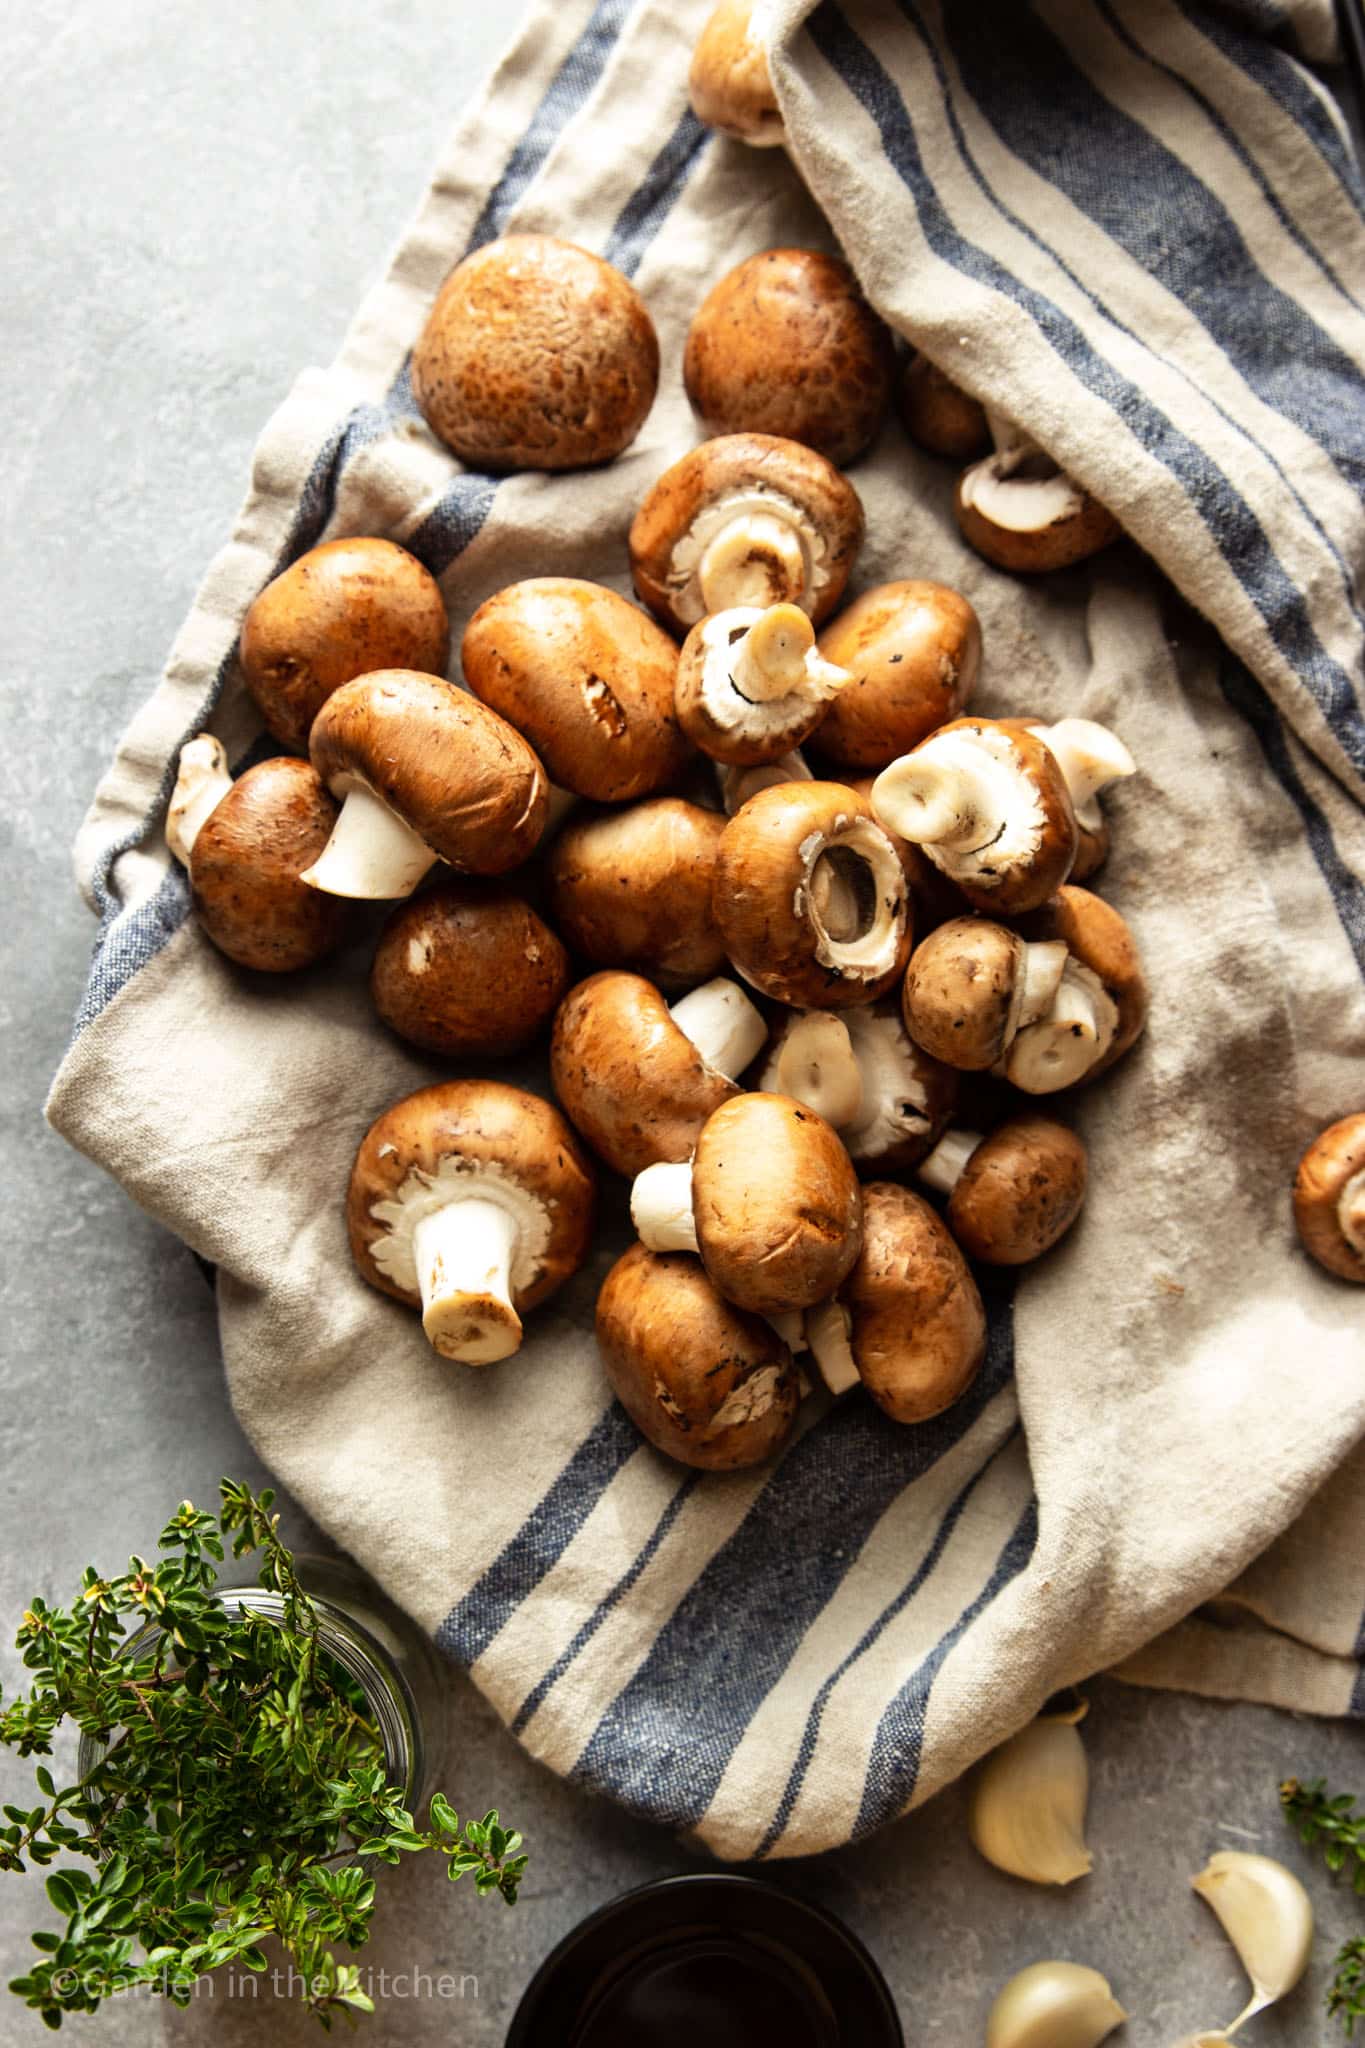 How to clean mushrooms using a dry towel. Fresh herbs and garlic on the table. 